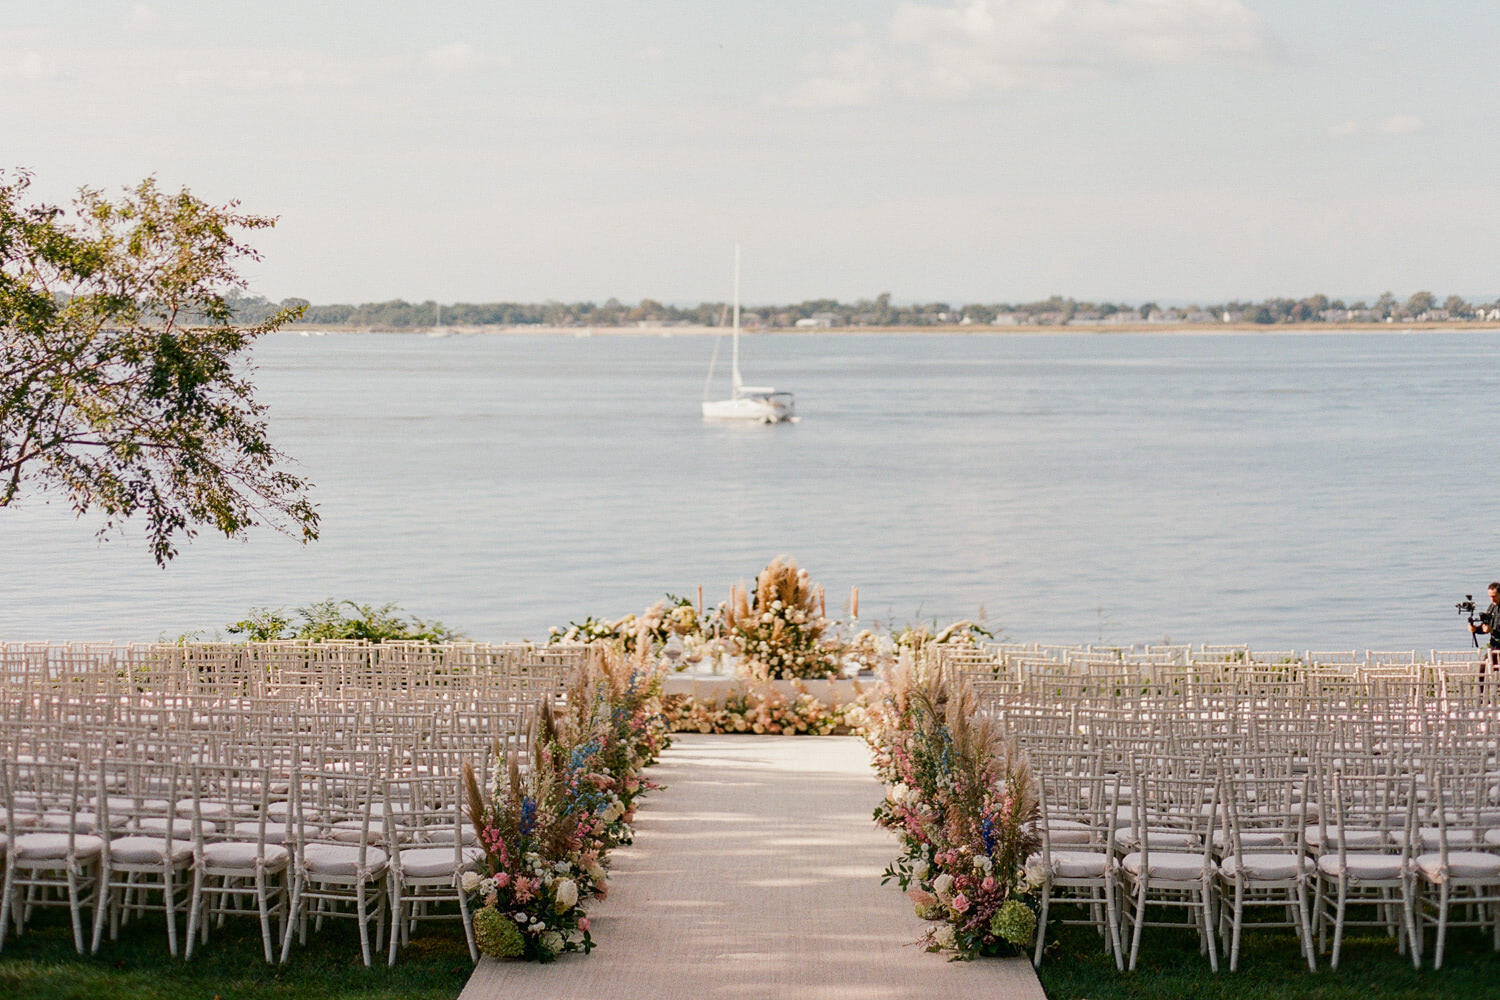 A waterfront wedding ceremony overlooking Oyster Bay in Long Island is set with white Chiavari chairs and an aisle lined with pastel flowers.